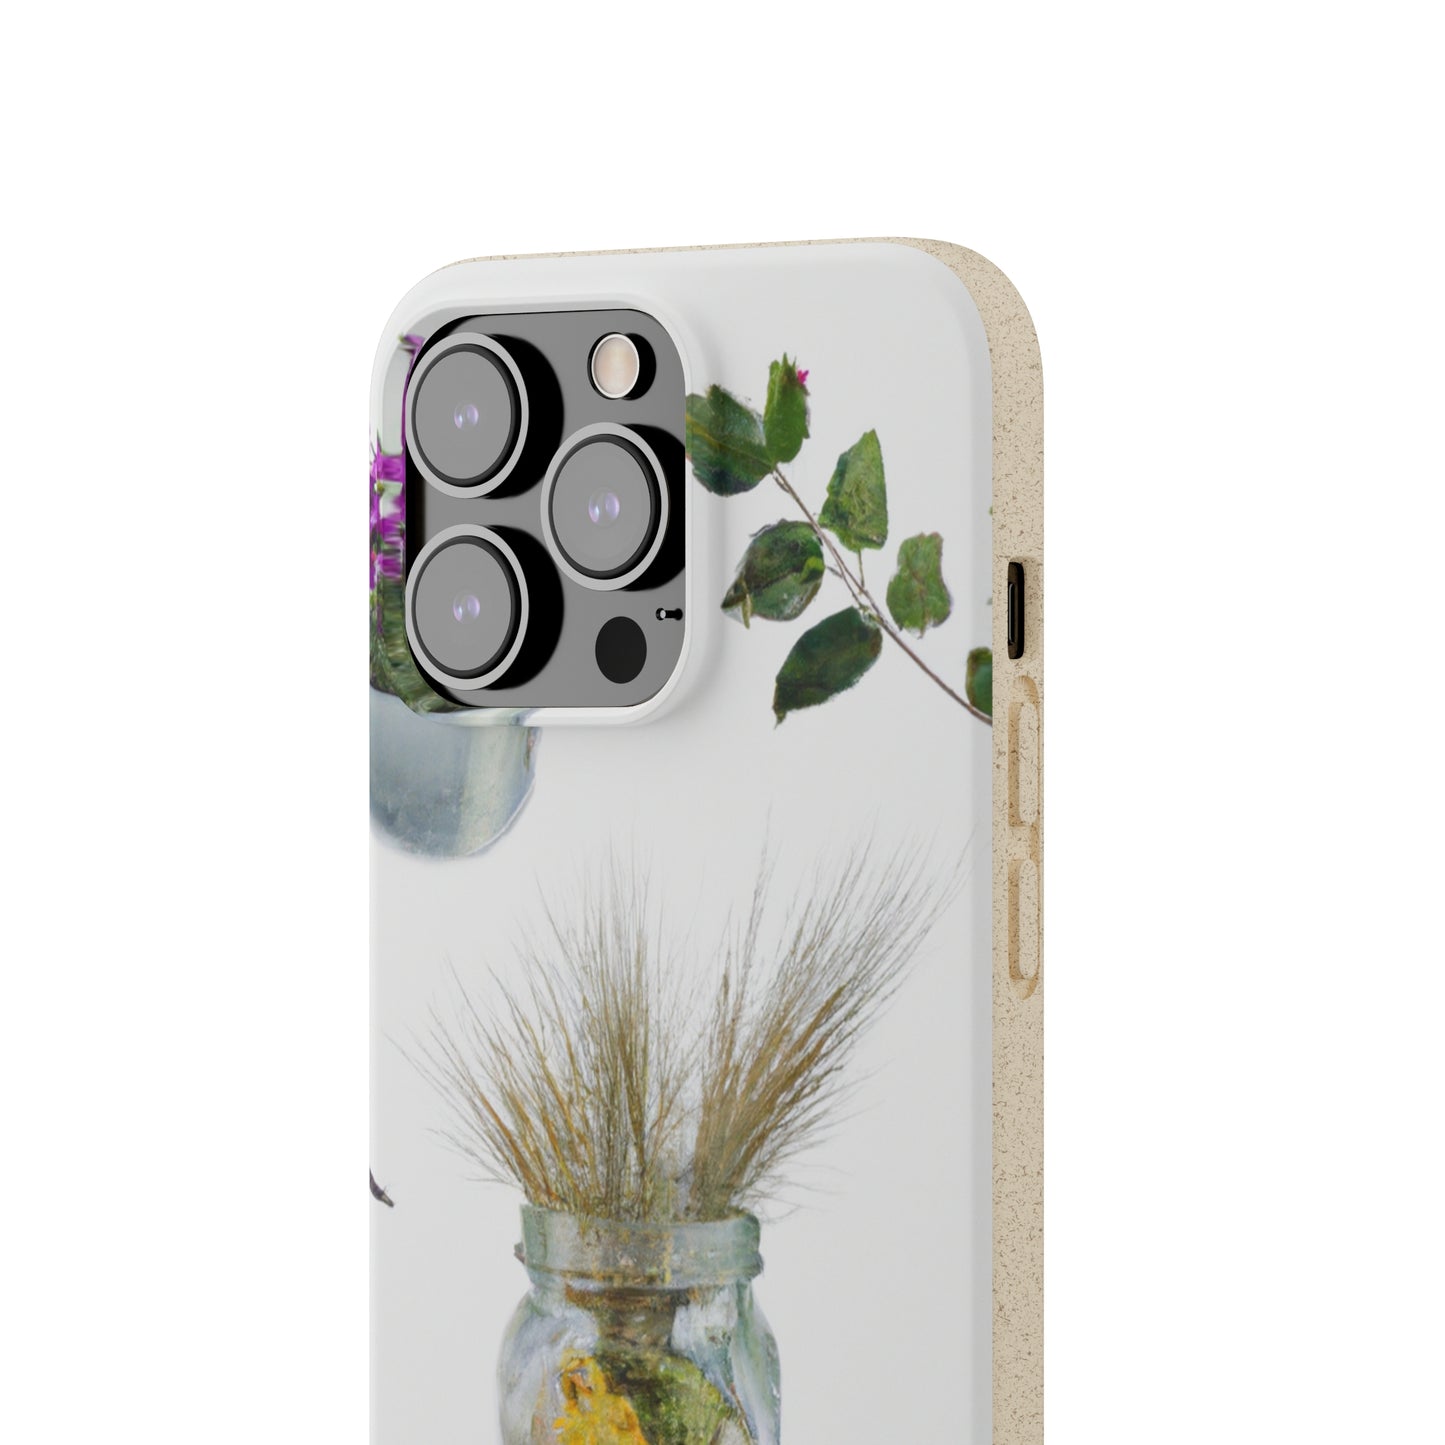 "A Nature Collage: Celebrating the Beauty of the Outdoors" - Bam Boo! Lifestyle Eco-friendly Cases